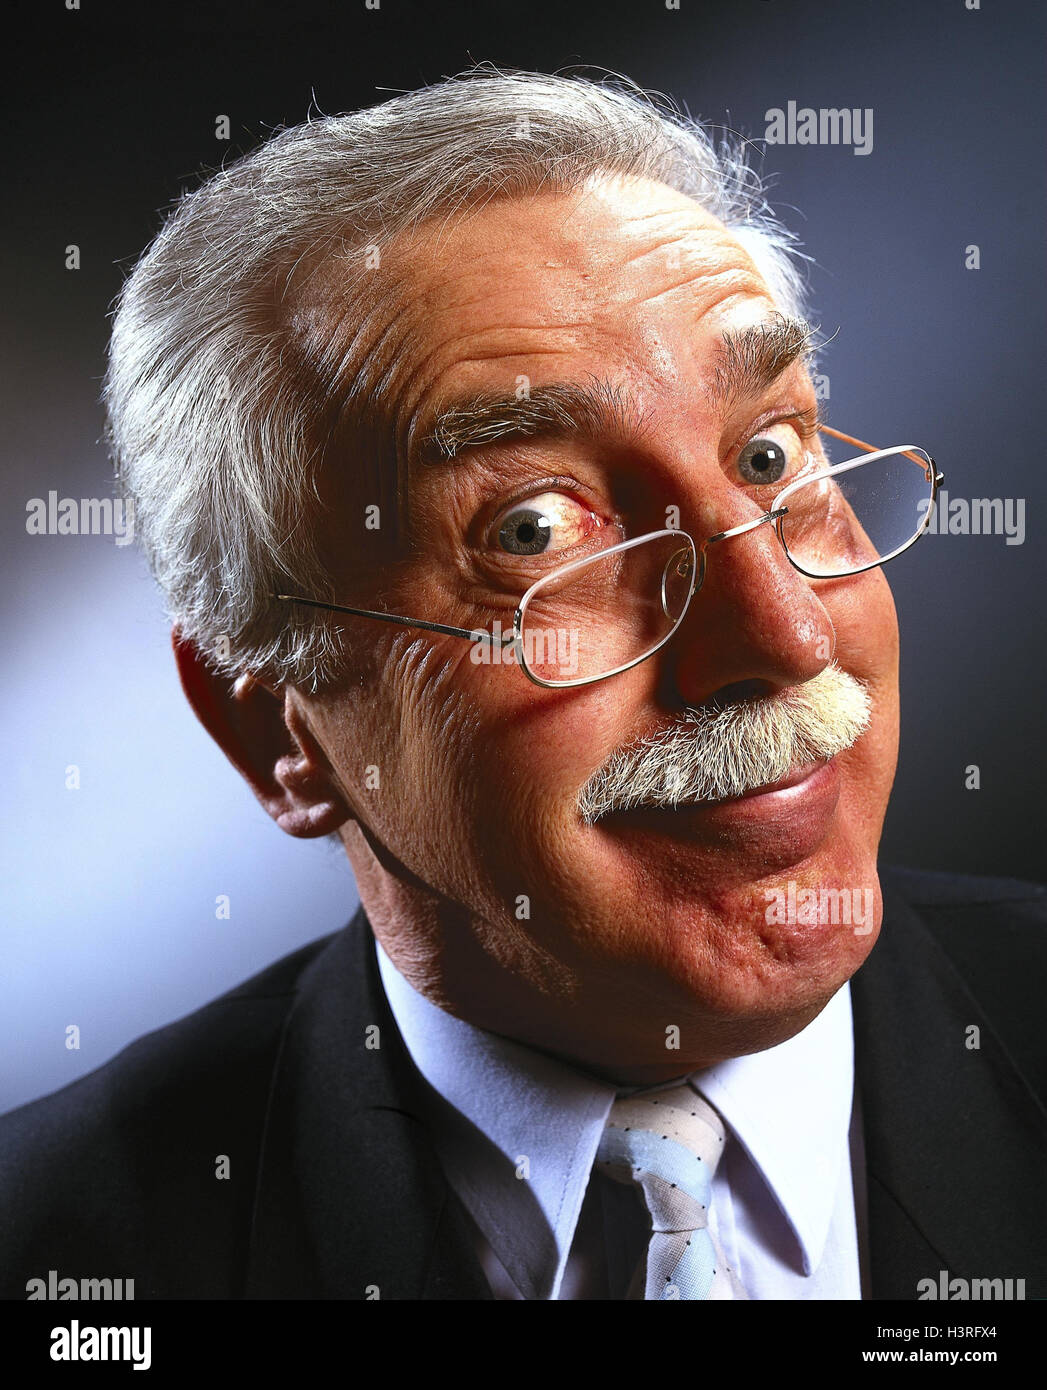 Senior, glasses, facial play, joy, portrait, gesp. Unt. Electronics inside, man, moustache, schnauzers, smile, smile, interrogatorily, contently, satisfaction, equalised, confidently, approval, words, studio, cut out Stock Photo